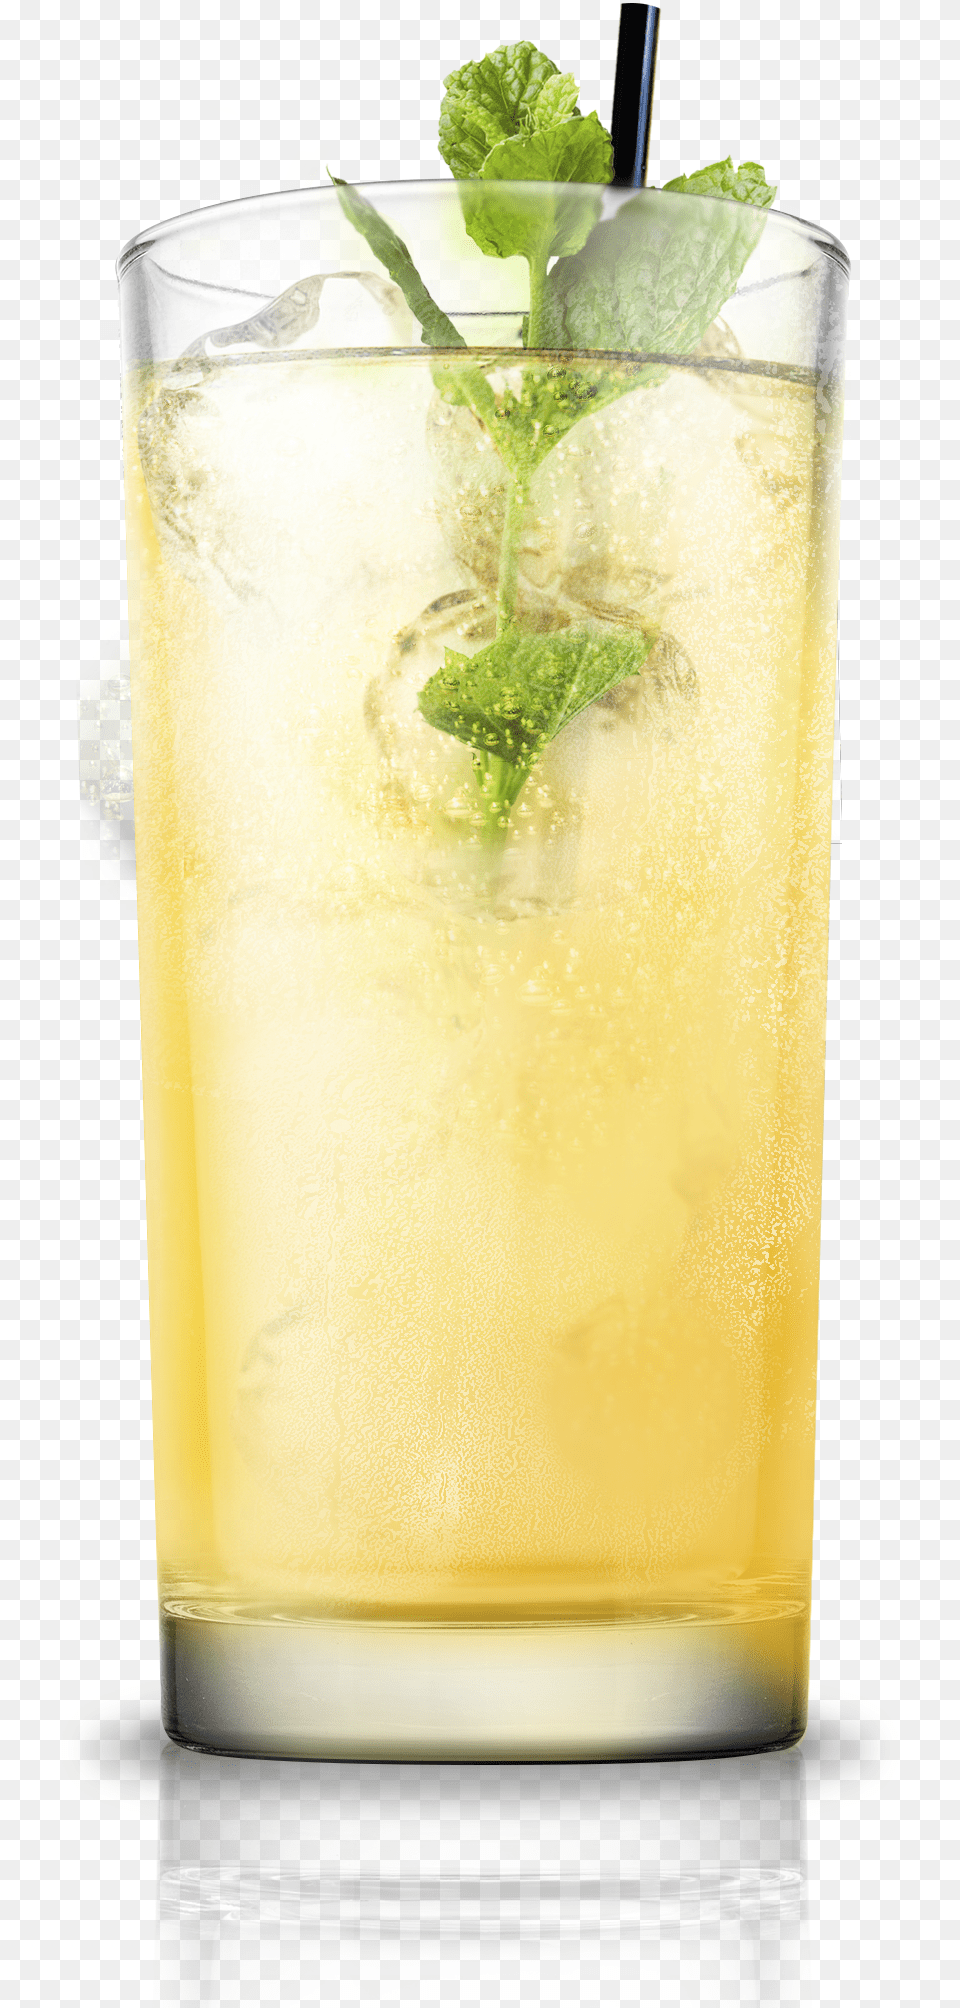 Mojito Download Floral Design, Alcohol, Beverage, Cocktail, Herbs Free Transparent Png